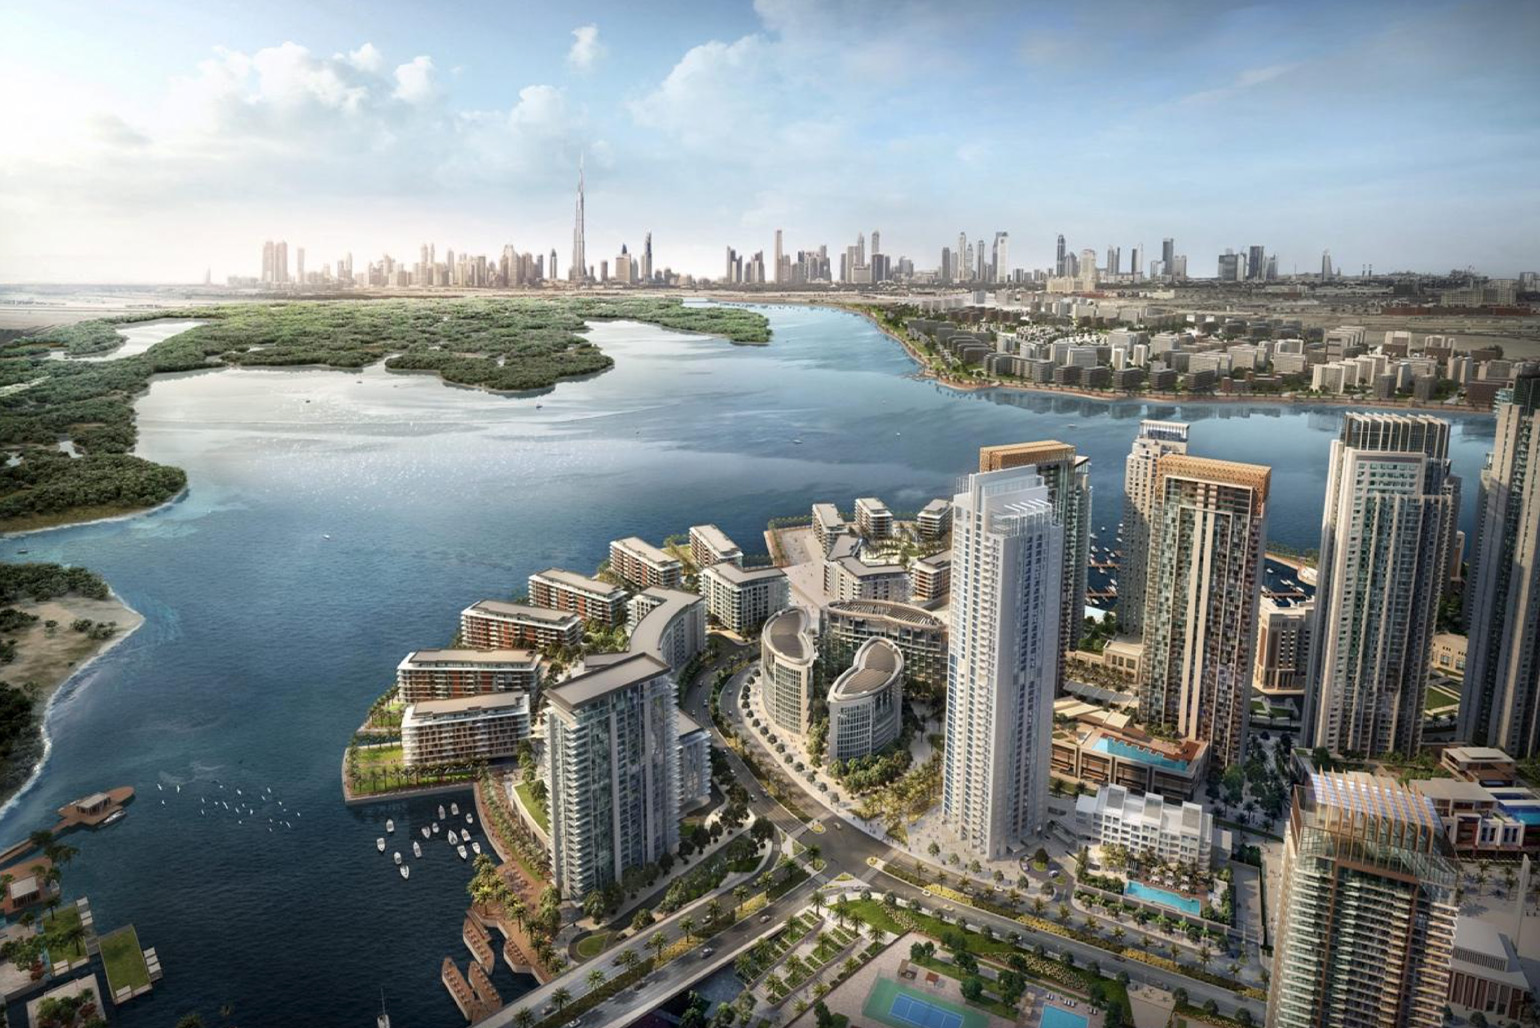 Emaar Signs A Deal With Dubai Holding To Fully Acquire Dubai Creek Harbour